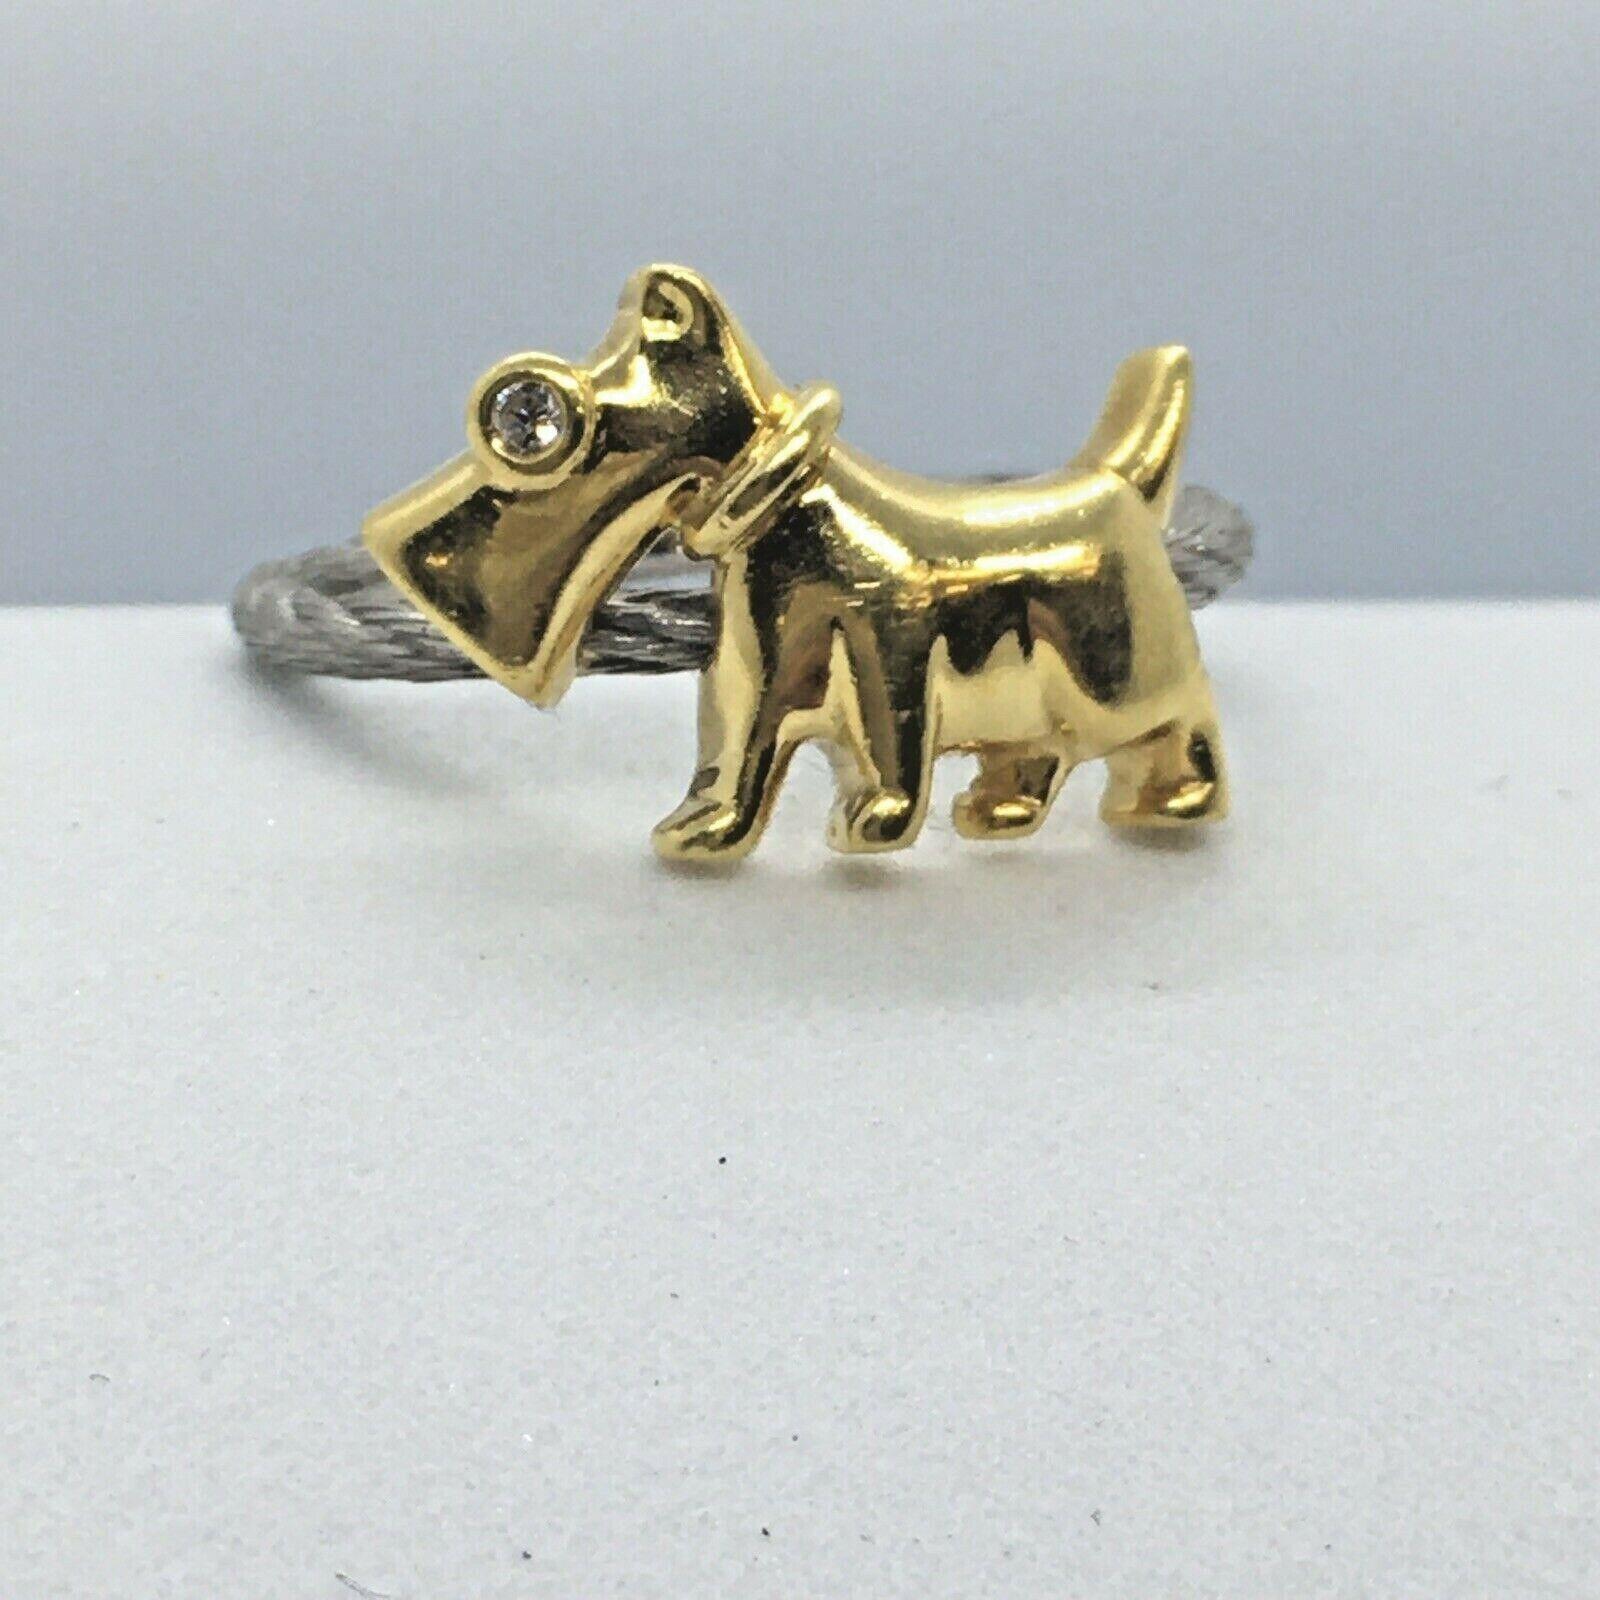 Schnauzer White Yellow 18k Gold Handmade Diamond Ring

Size 6.5
Weighing 4.4 grams
1/2 inch top  
Marked 'K18', 'K18WG' , tested 18K Gold
Small Diamond eye
In excellent pre-owned condition, no evidence of repairs, never sized, no damage, see pictures